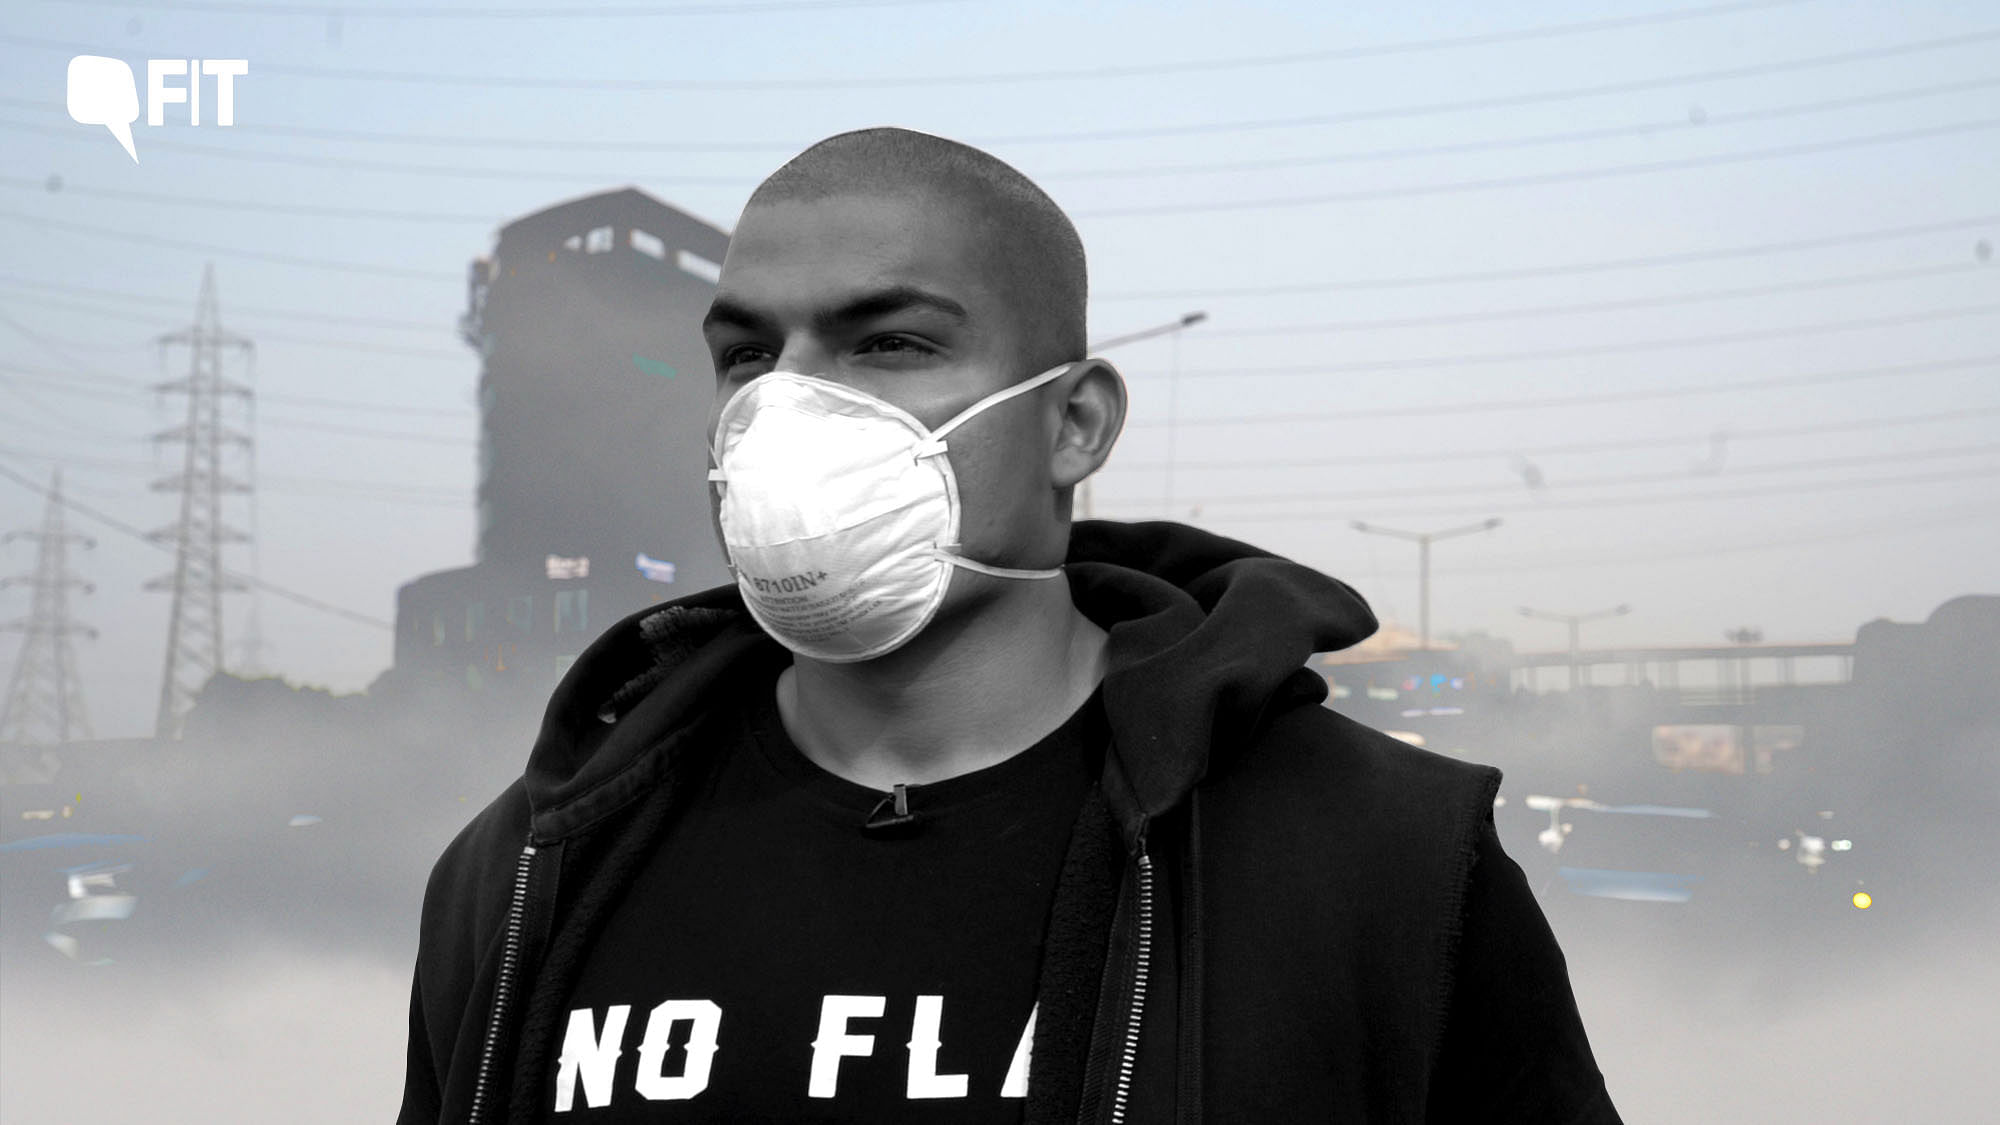 Raoul Kerr is a Delhi-based rapper. He recently released a song on Delhi’s toxic air that went viral.&nbsp;